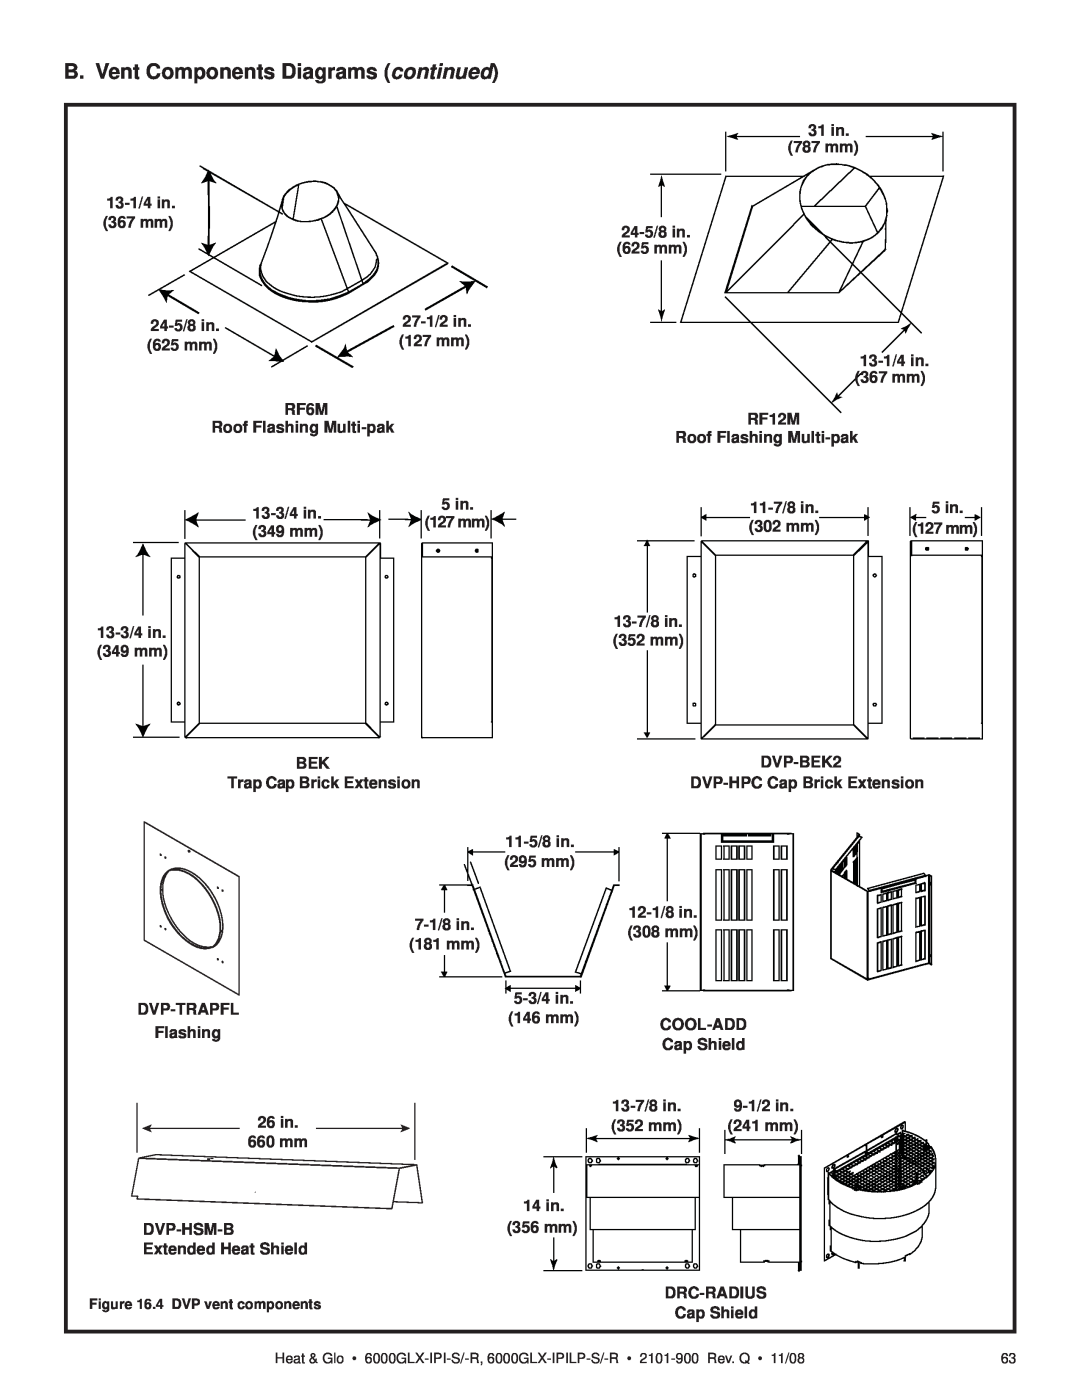 Heat & Glo LifeStyle 6000GLX-IPILP-S/-R B. Vent Components Diagrams continued, 31 in, 787 mm, 13-1/4in, 367 mm, 24-5/8in 